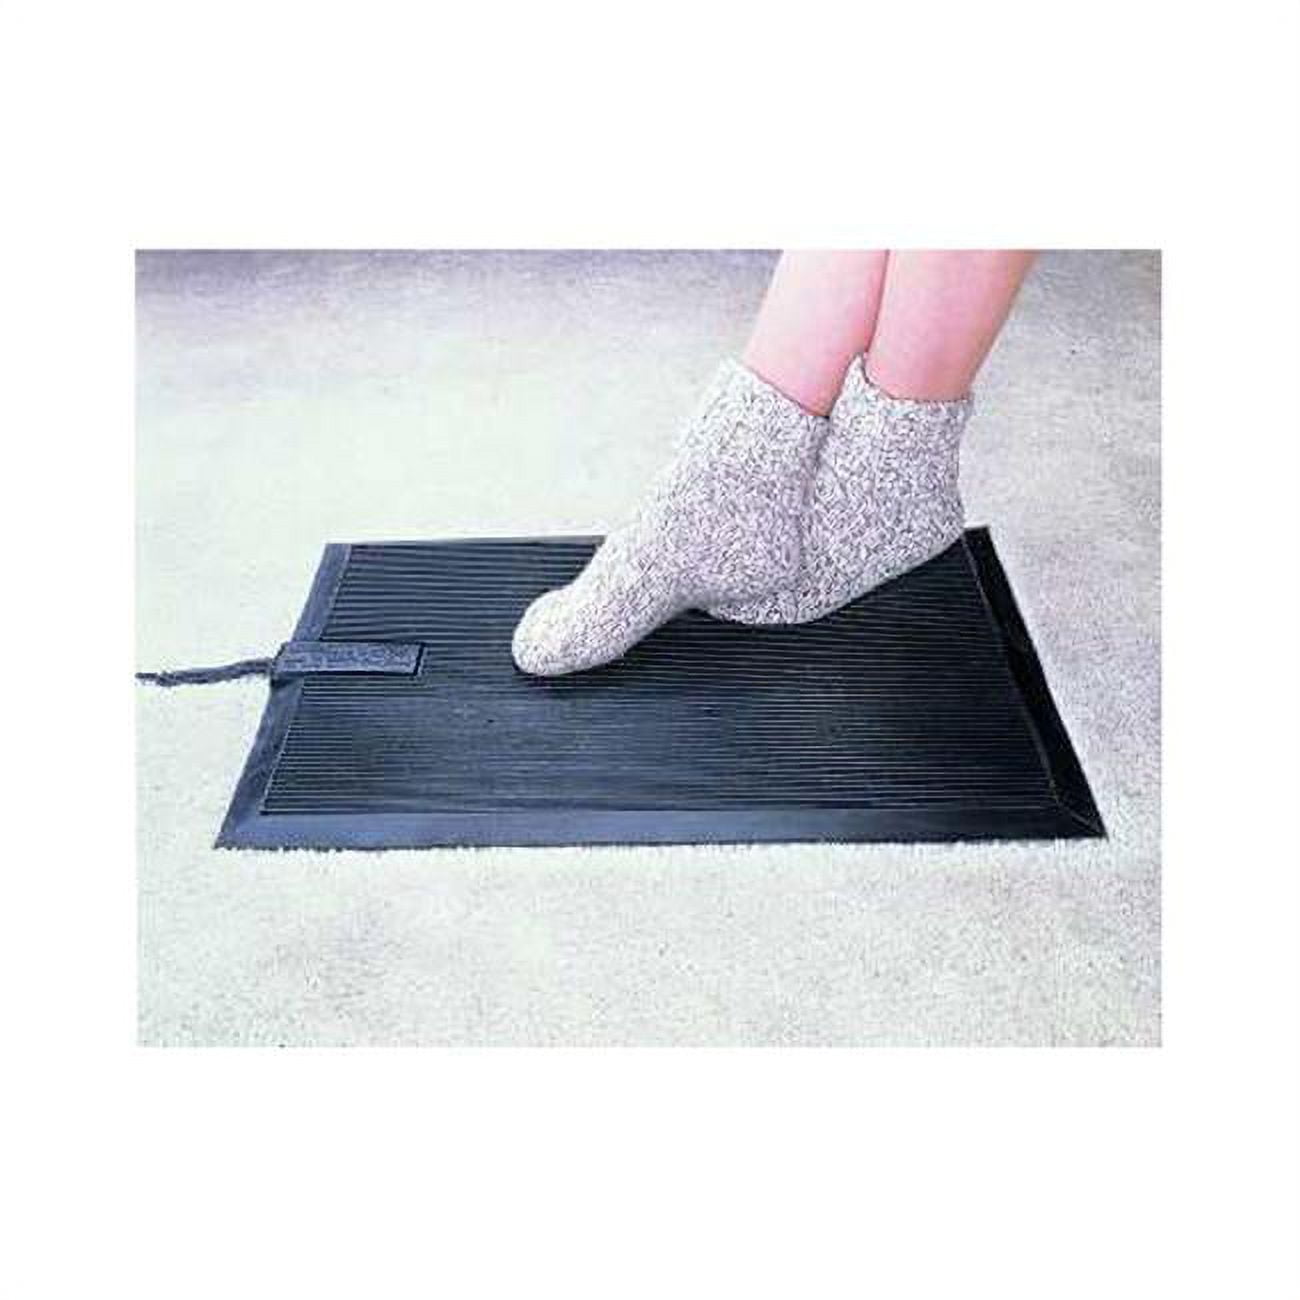 Bird-x, Inc. Cozy Products Toasty Toes Heated Footrest - Black